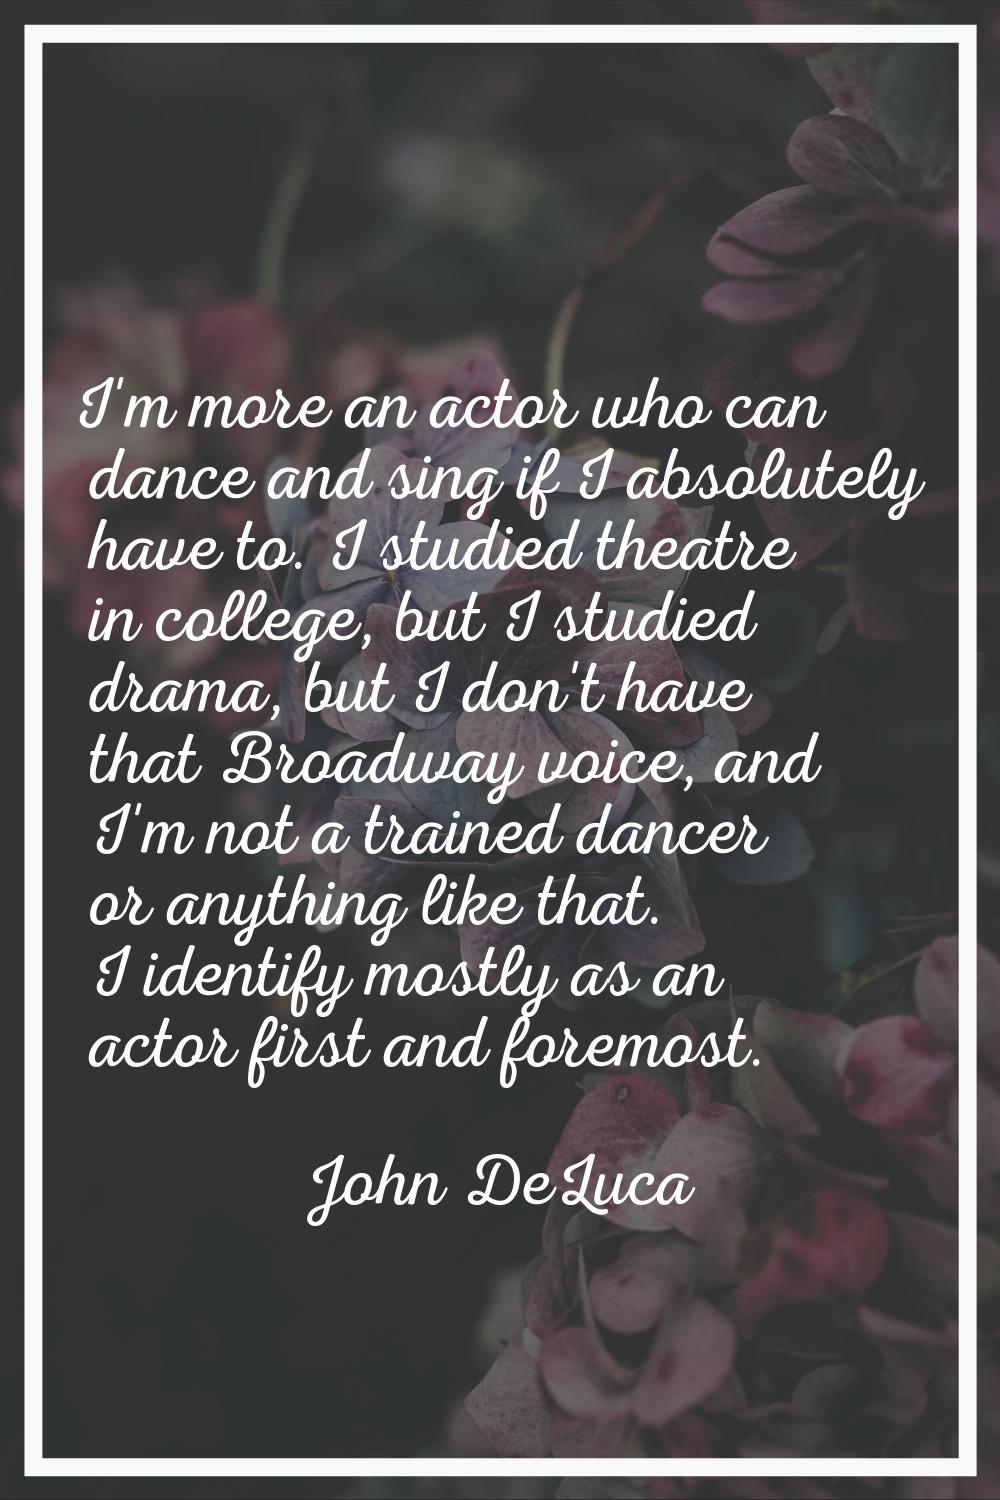 I'm more an actor who can dance and sing if I absolutely have to. I studied theatre in college, but